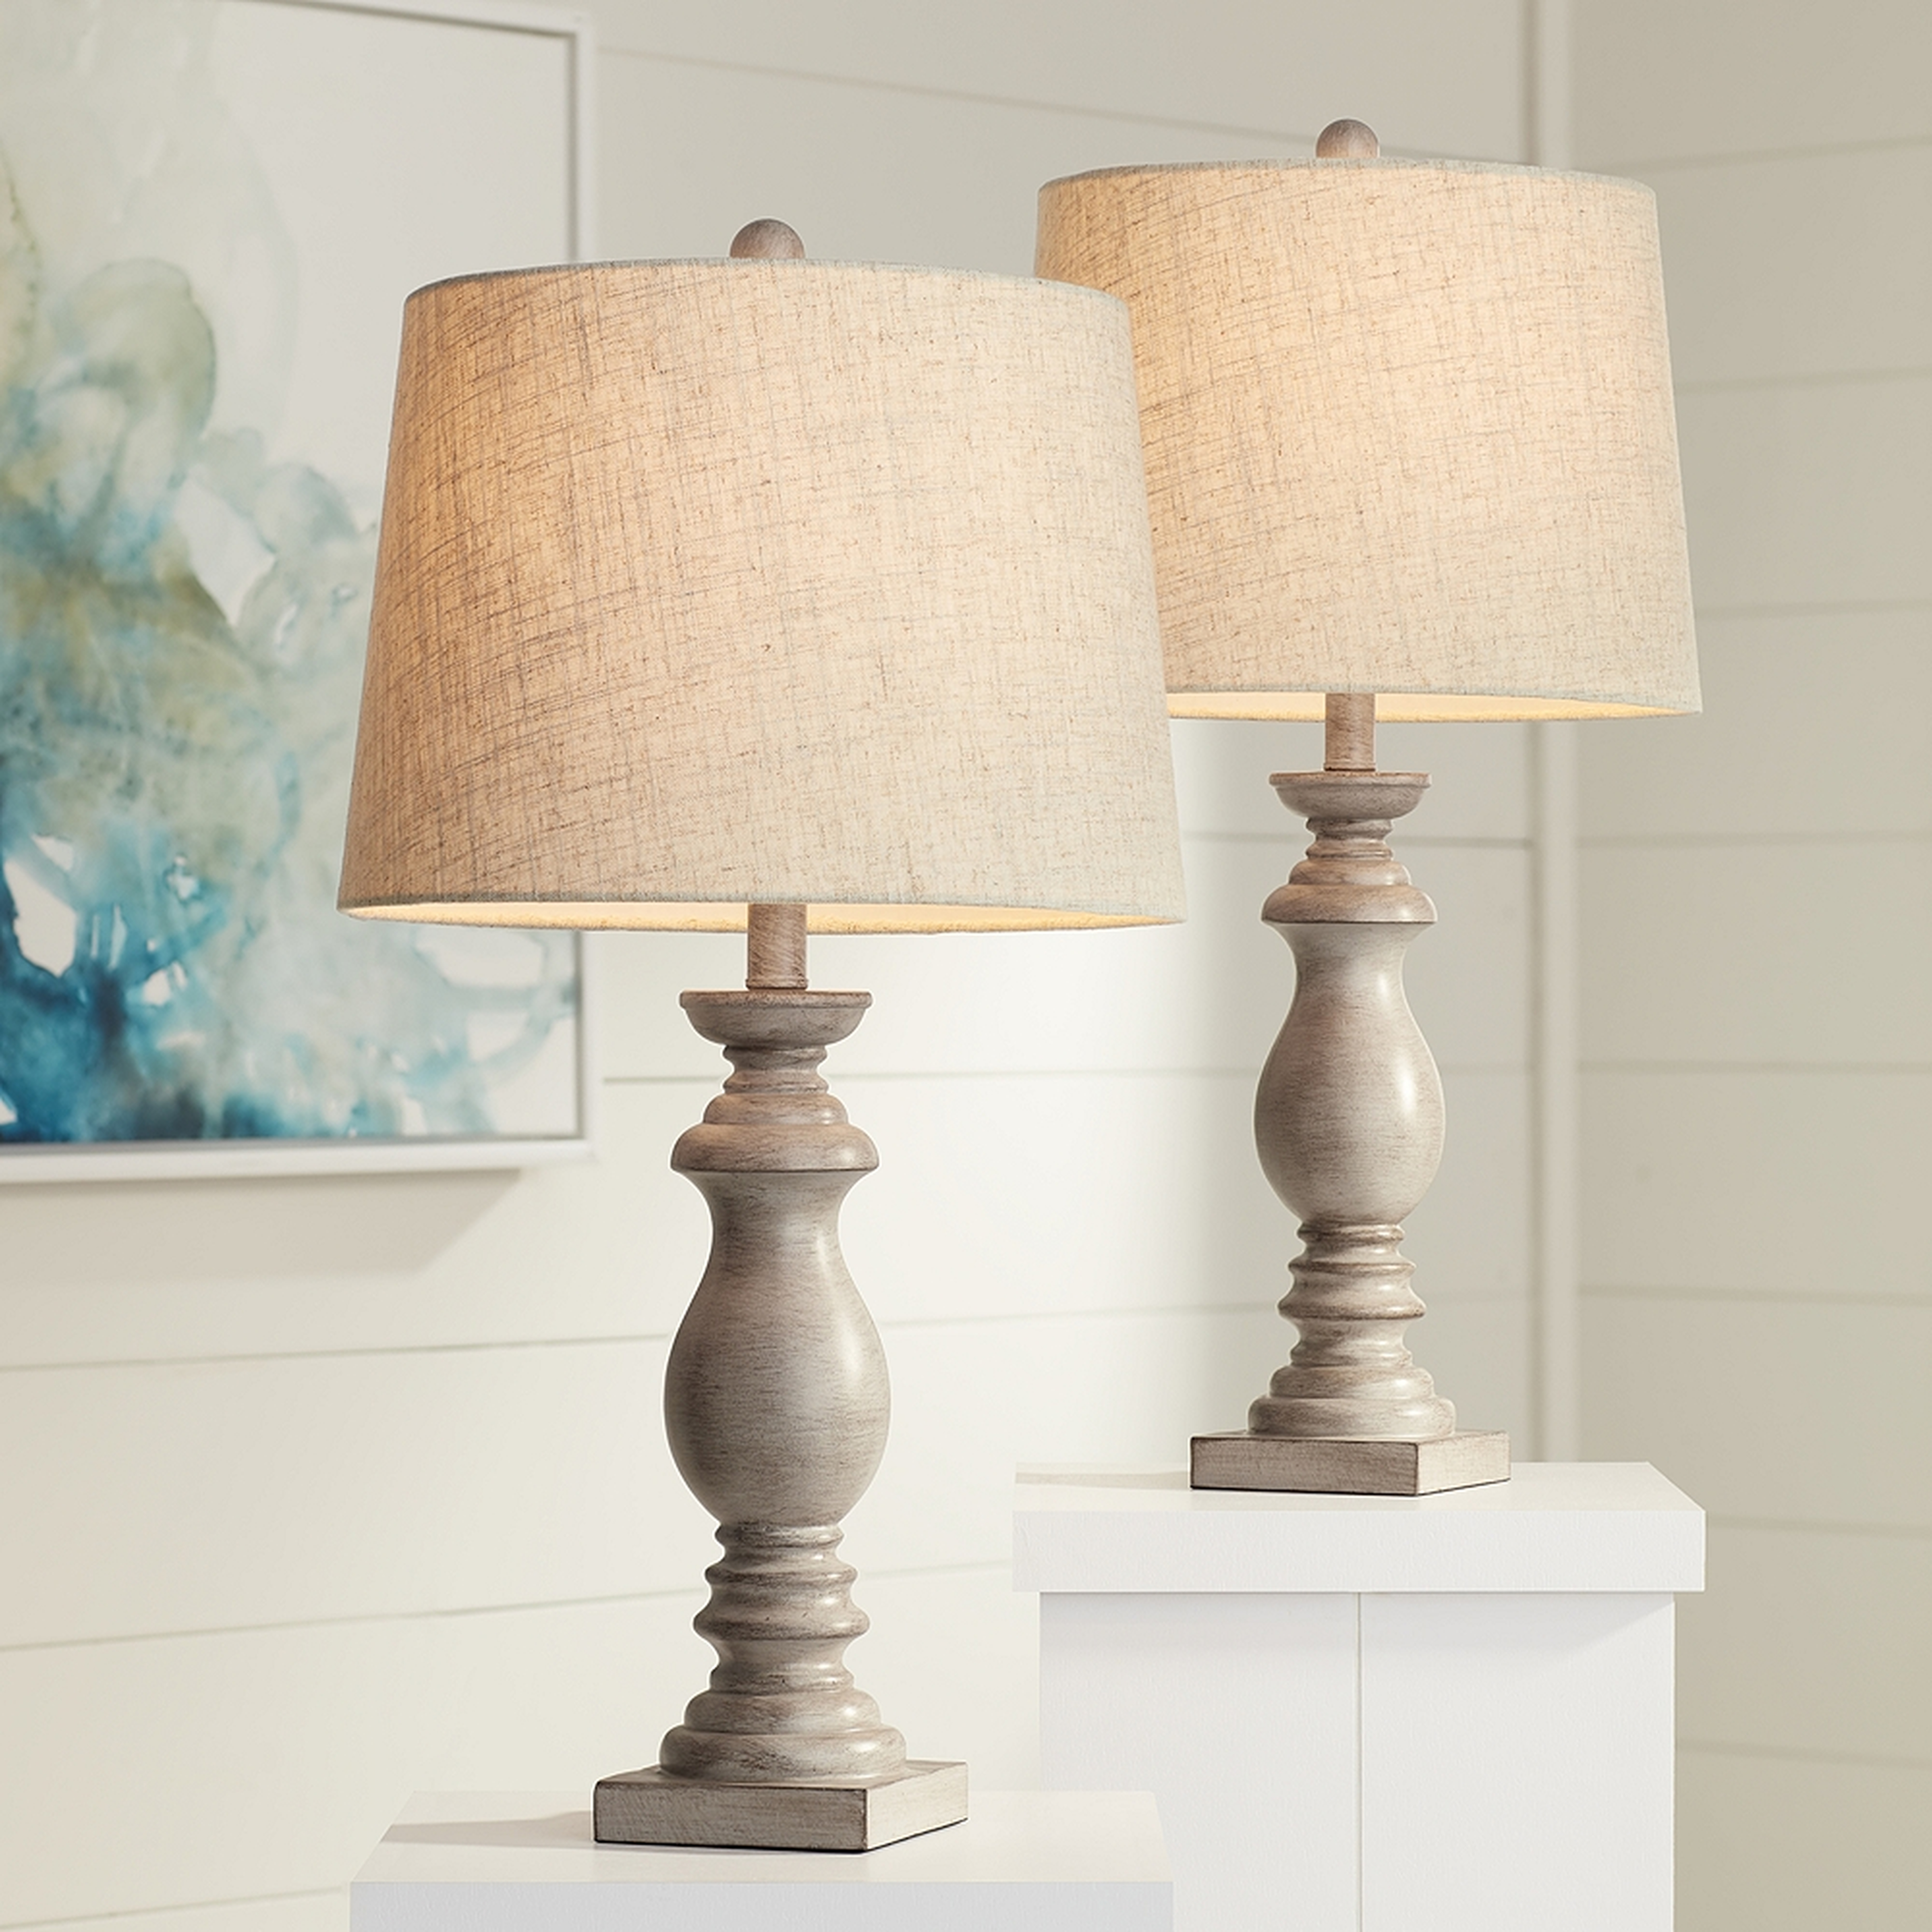 Patsy Beige Washed Table Lamps Set of 2 with WiFi Smart Sockets - Style # 89H98 - Lamps Plus